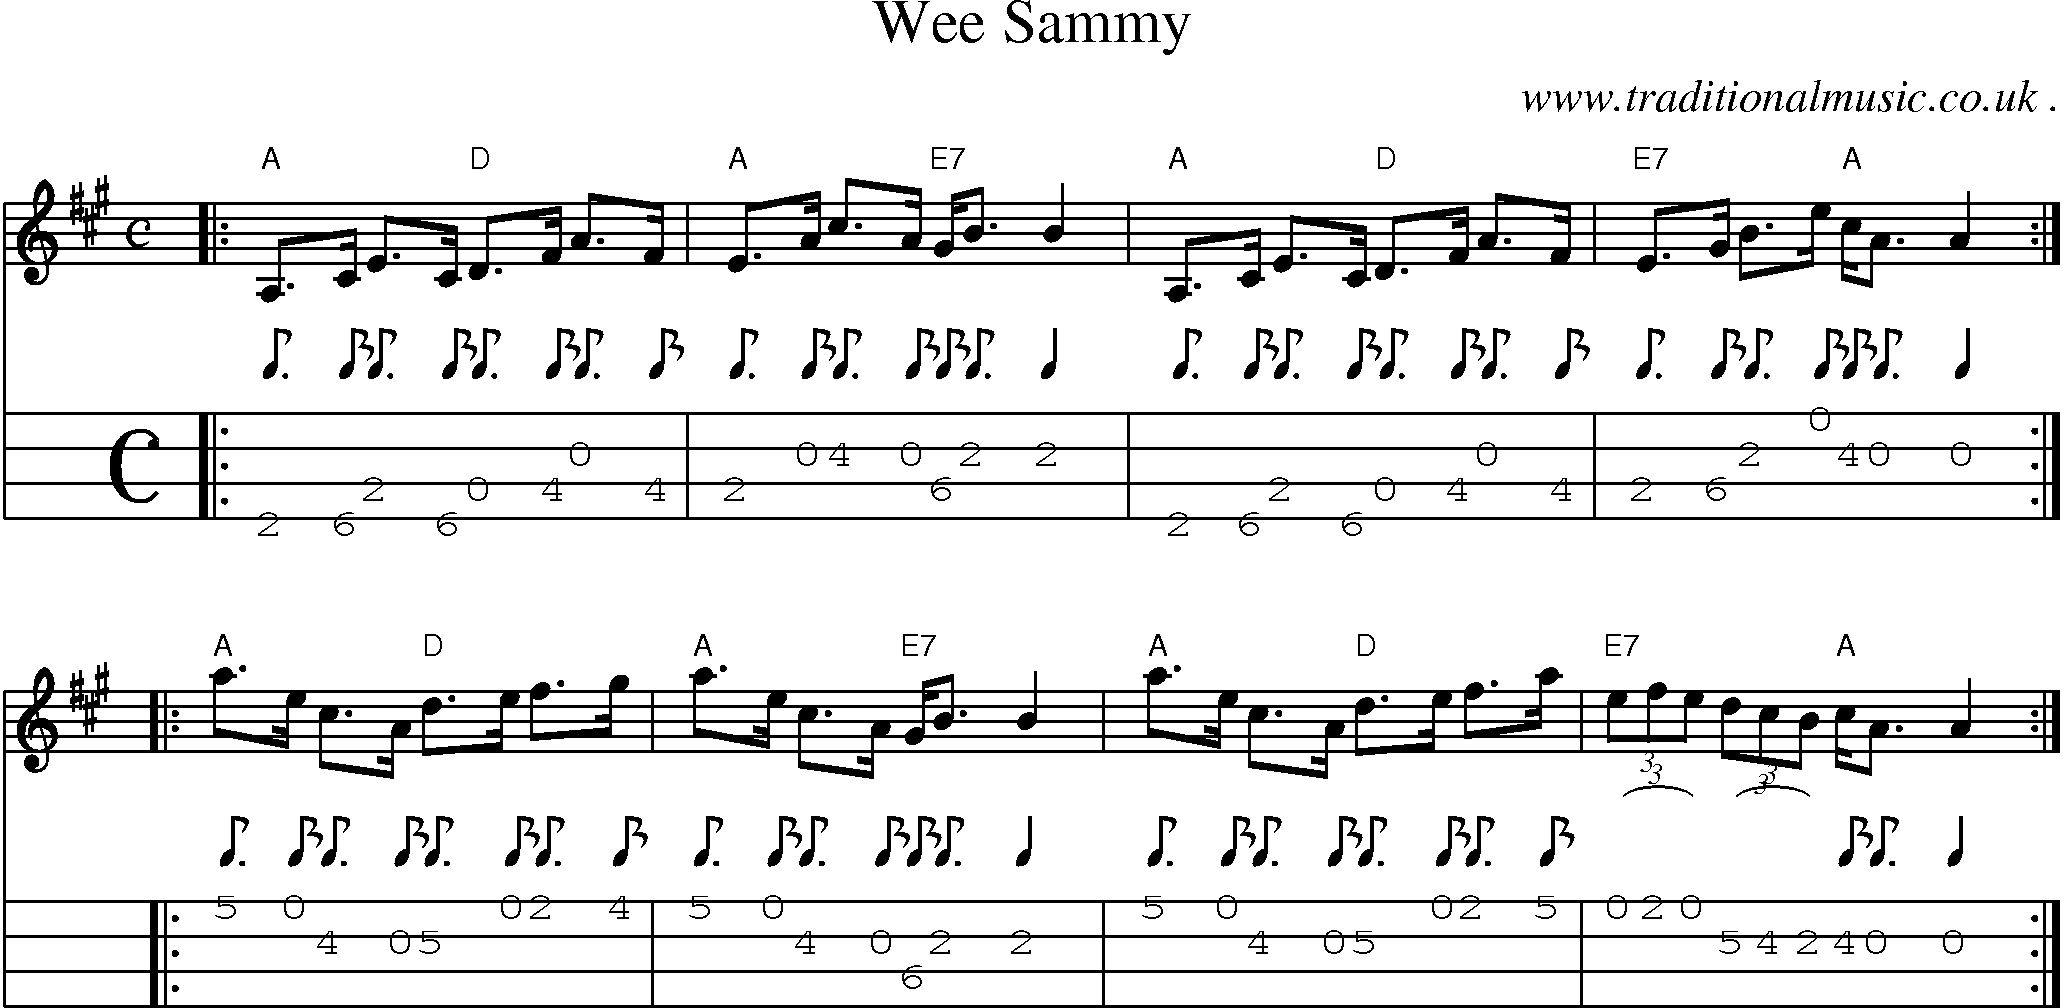 Sheet-music  score, Chords and Mandolin Tabs for Wee Sammy